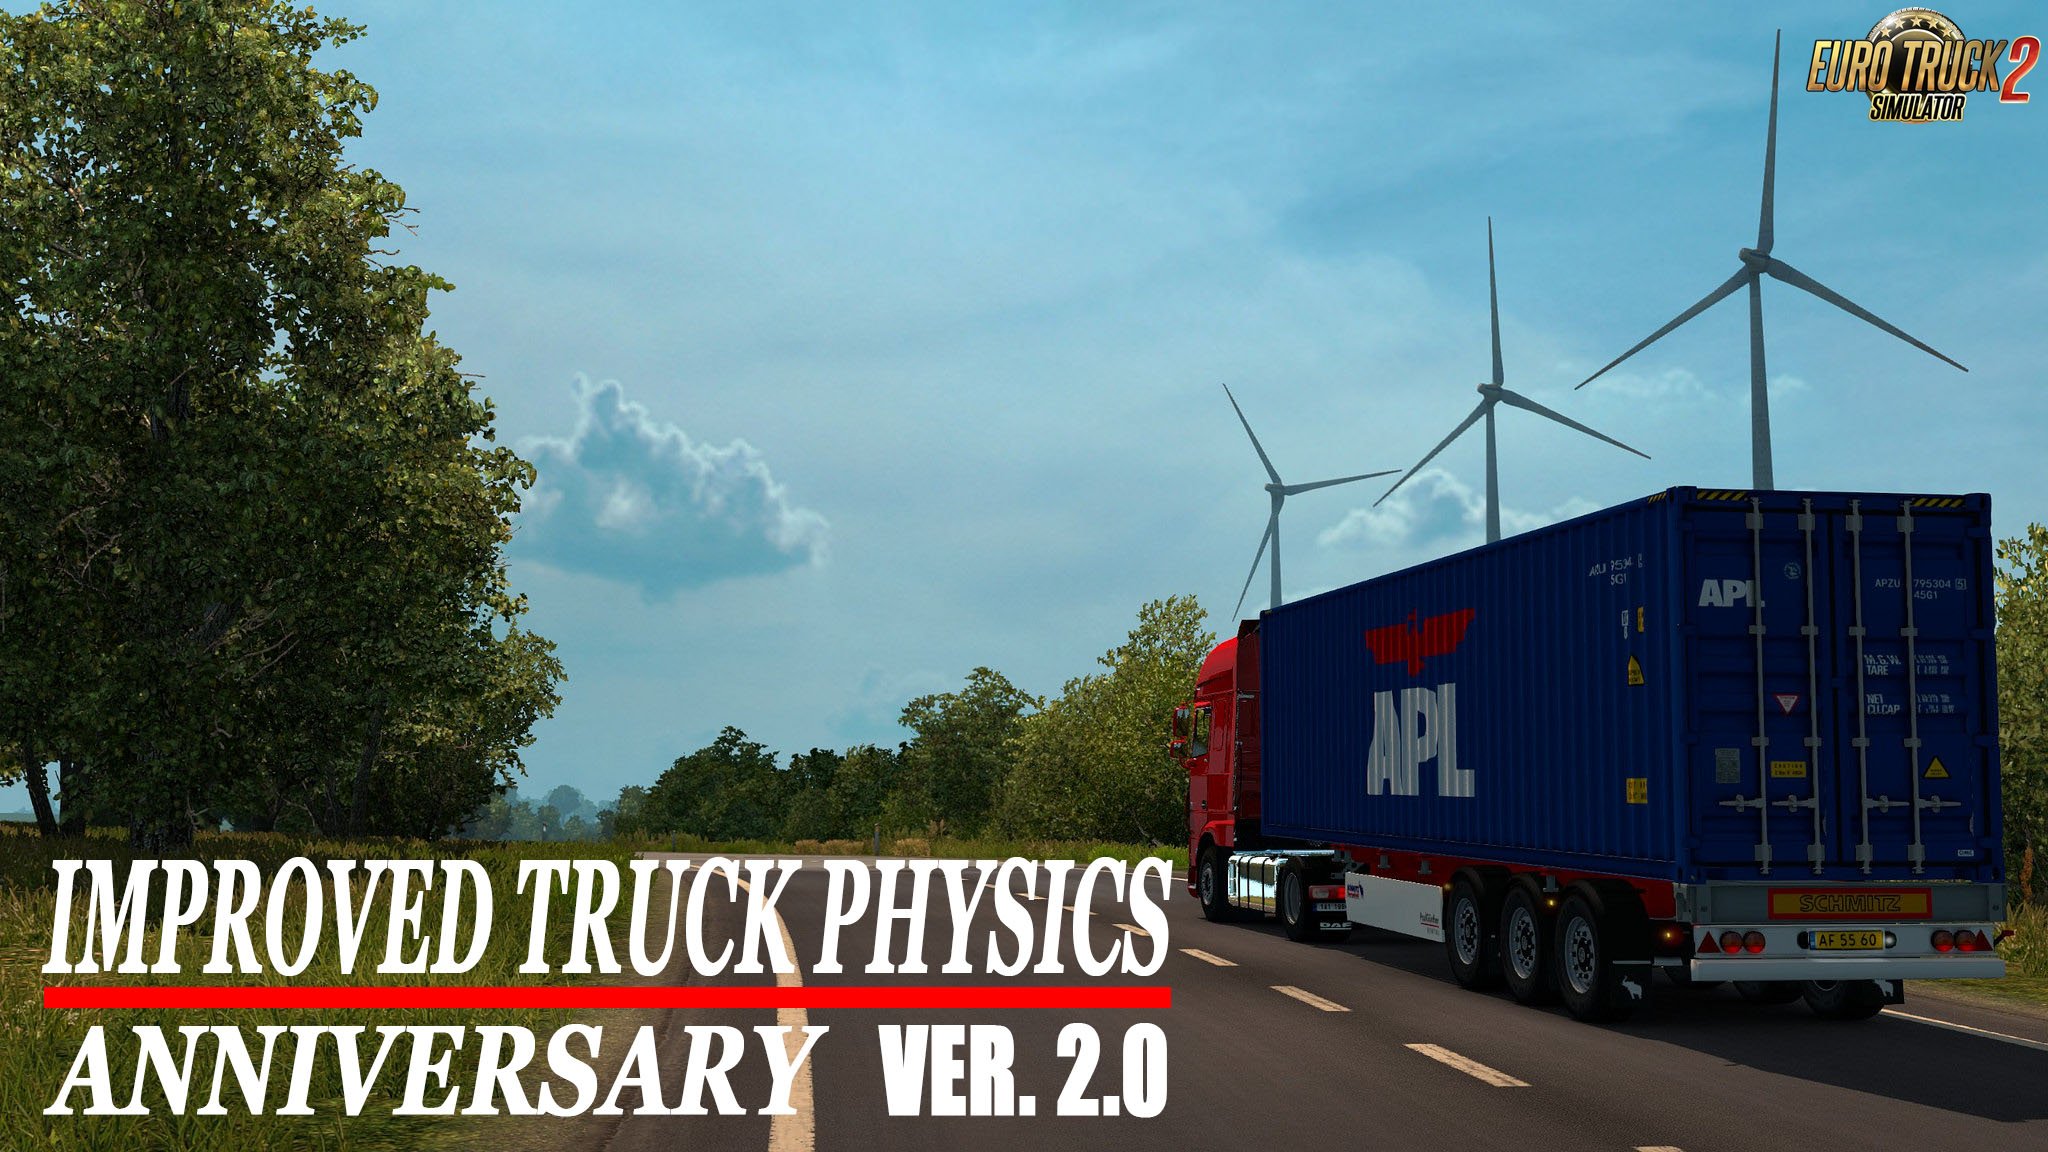 Improved truck physics 2.0 "Anniversary" edition (Fixes)